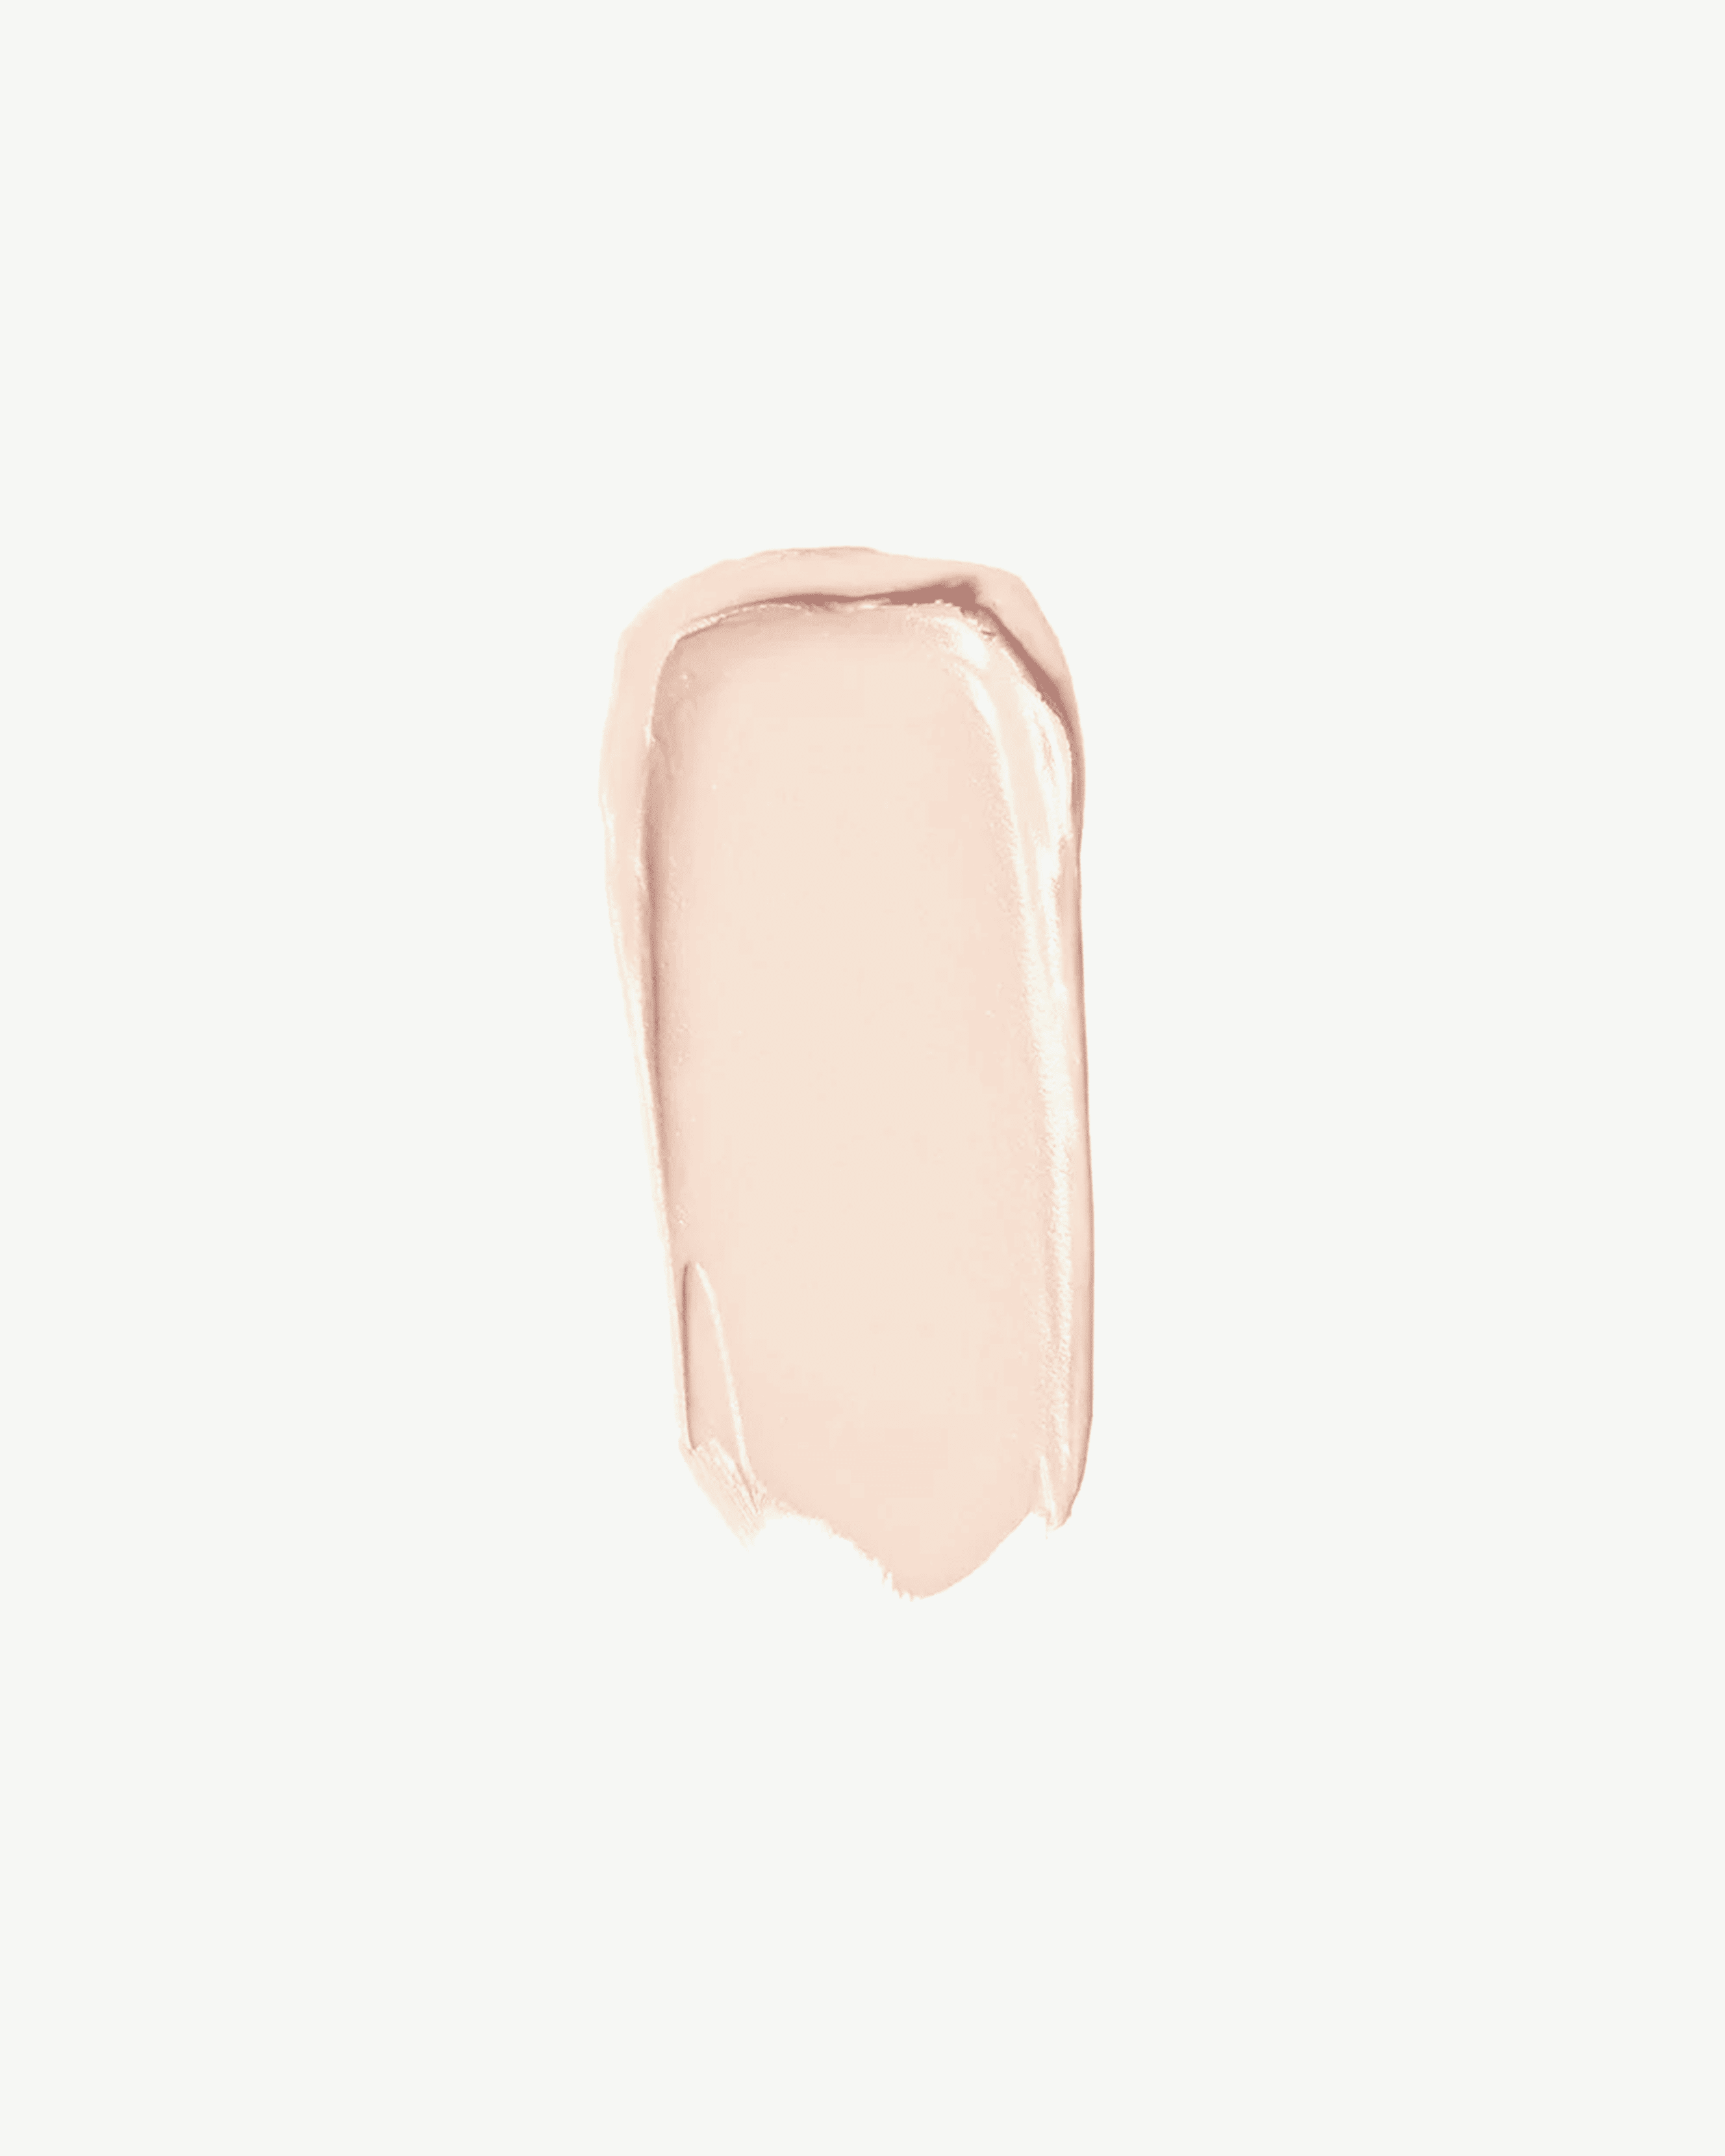 Pink 20 (fair to light with cool pink undertones)